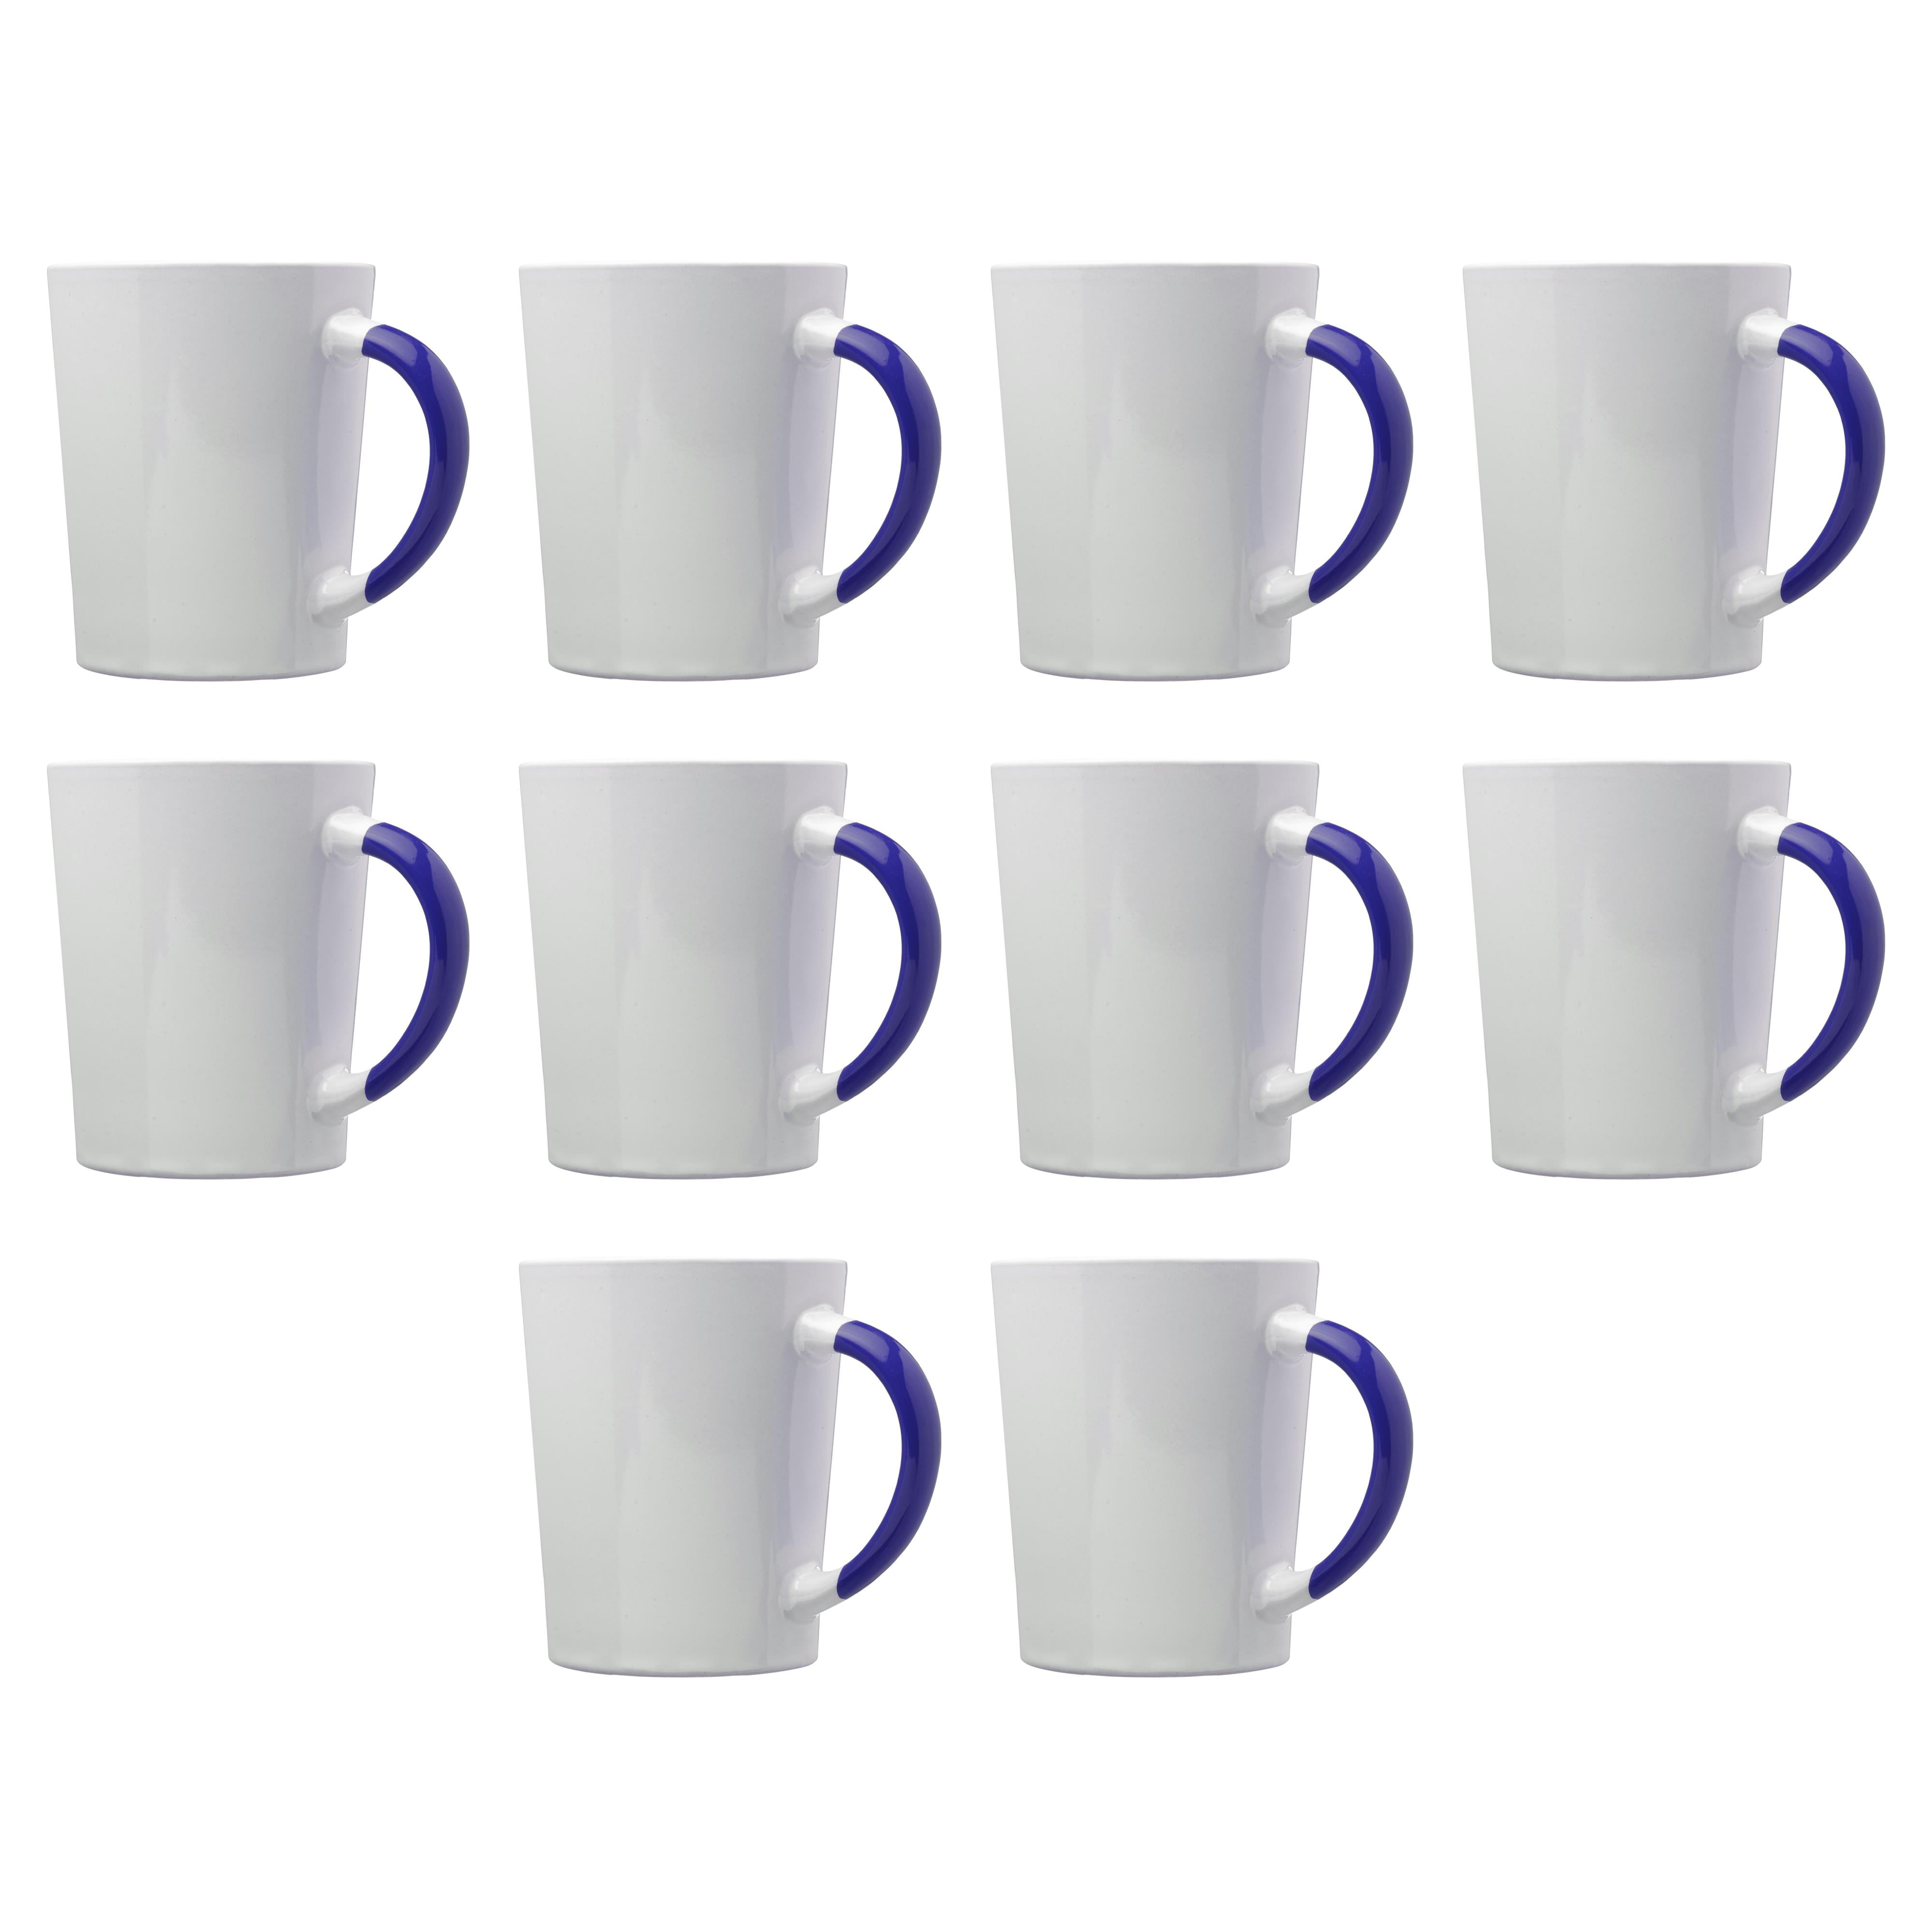 Ceramic Latte Coffee Mugs by Albany 13 oz. Set of 10, Bulk Pack - Perfect  for Coffee, Tea, Espresso, Hot Cocoa, Other Beverages - Cobalt Blue